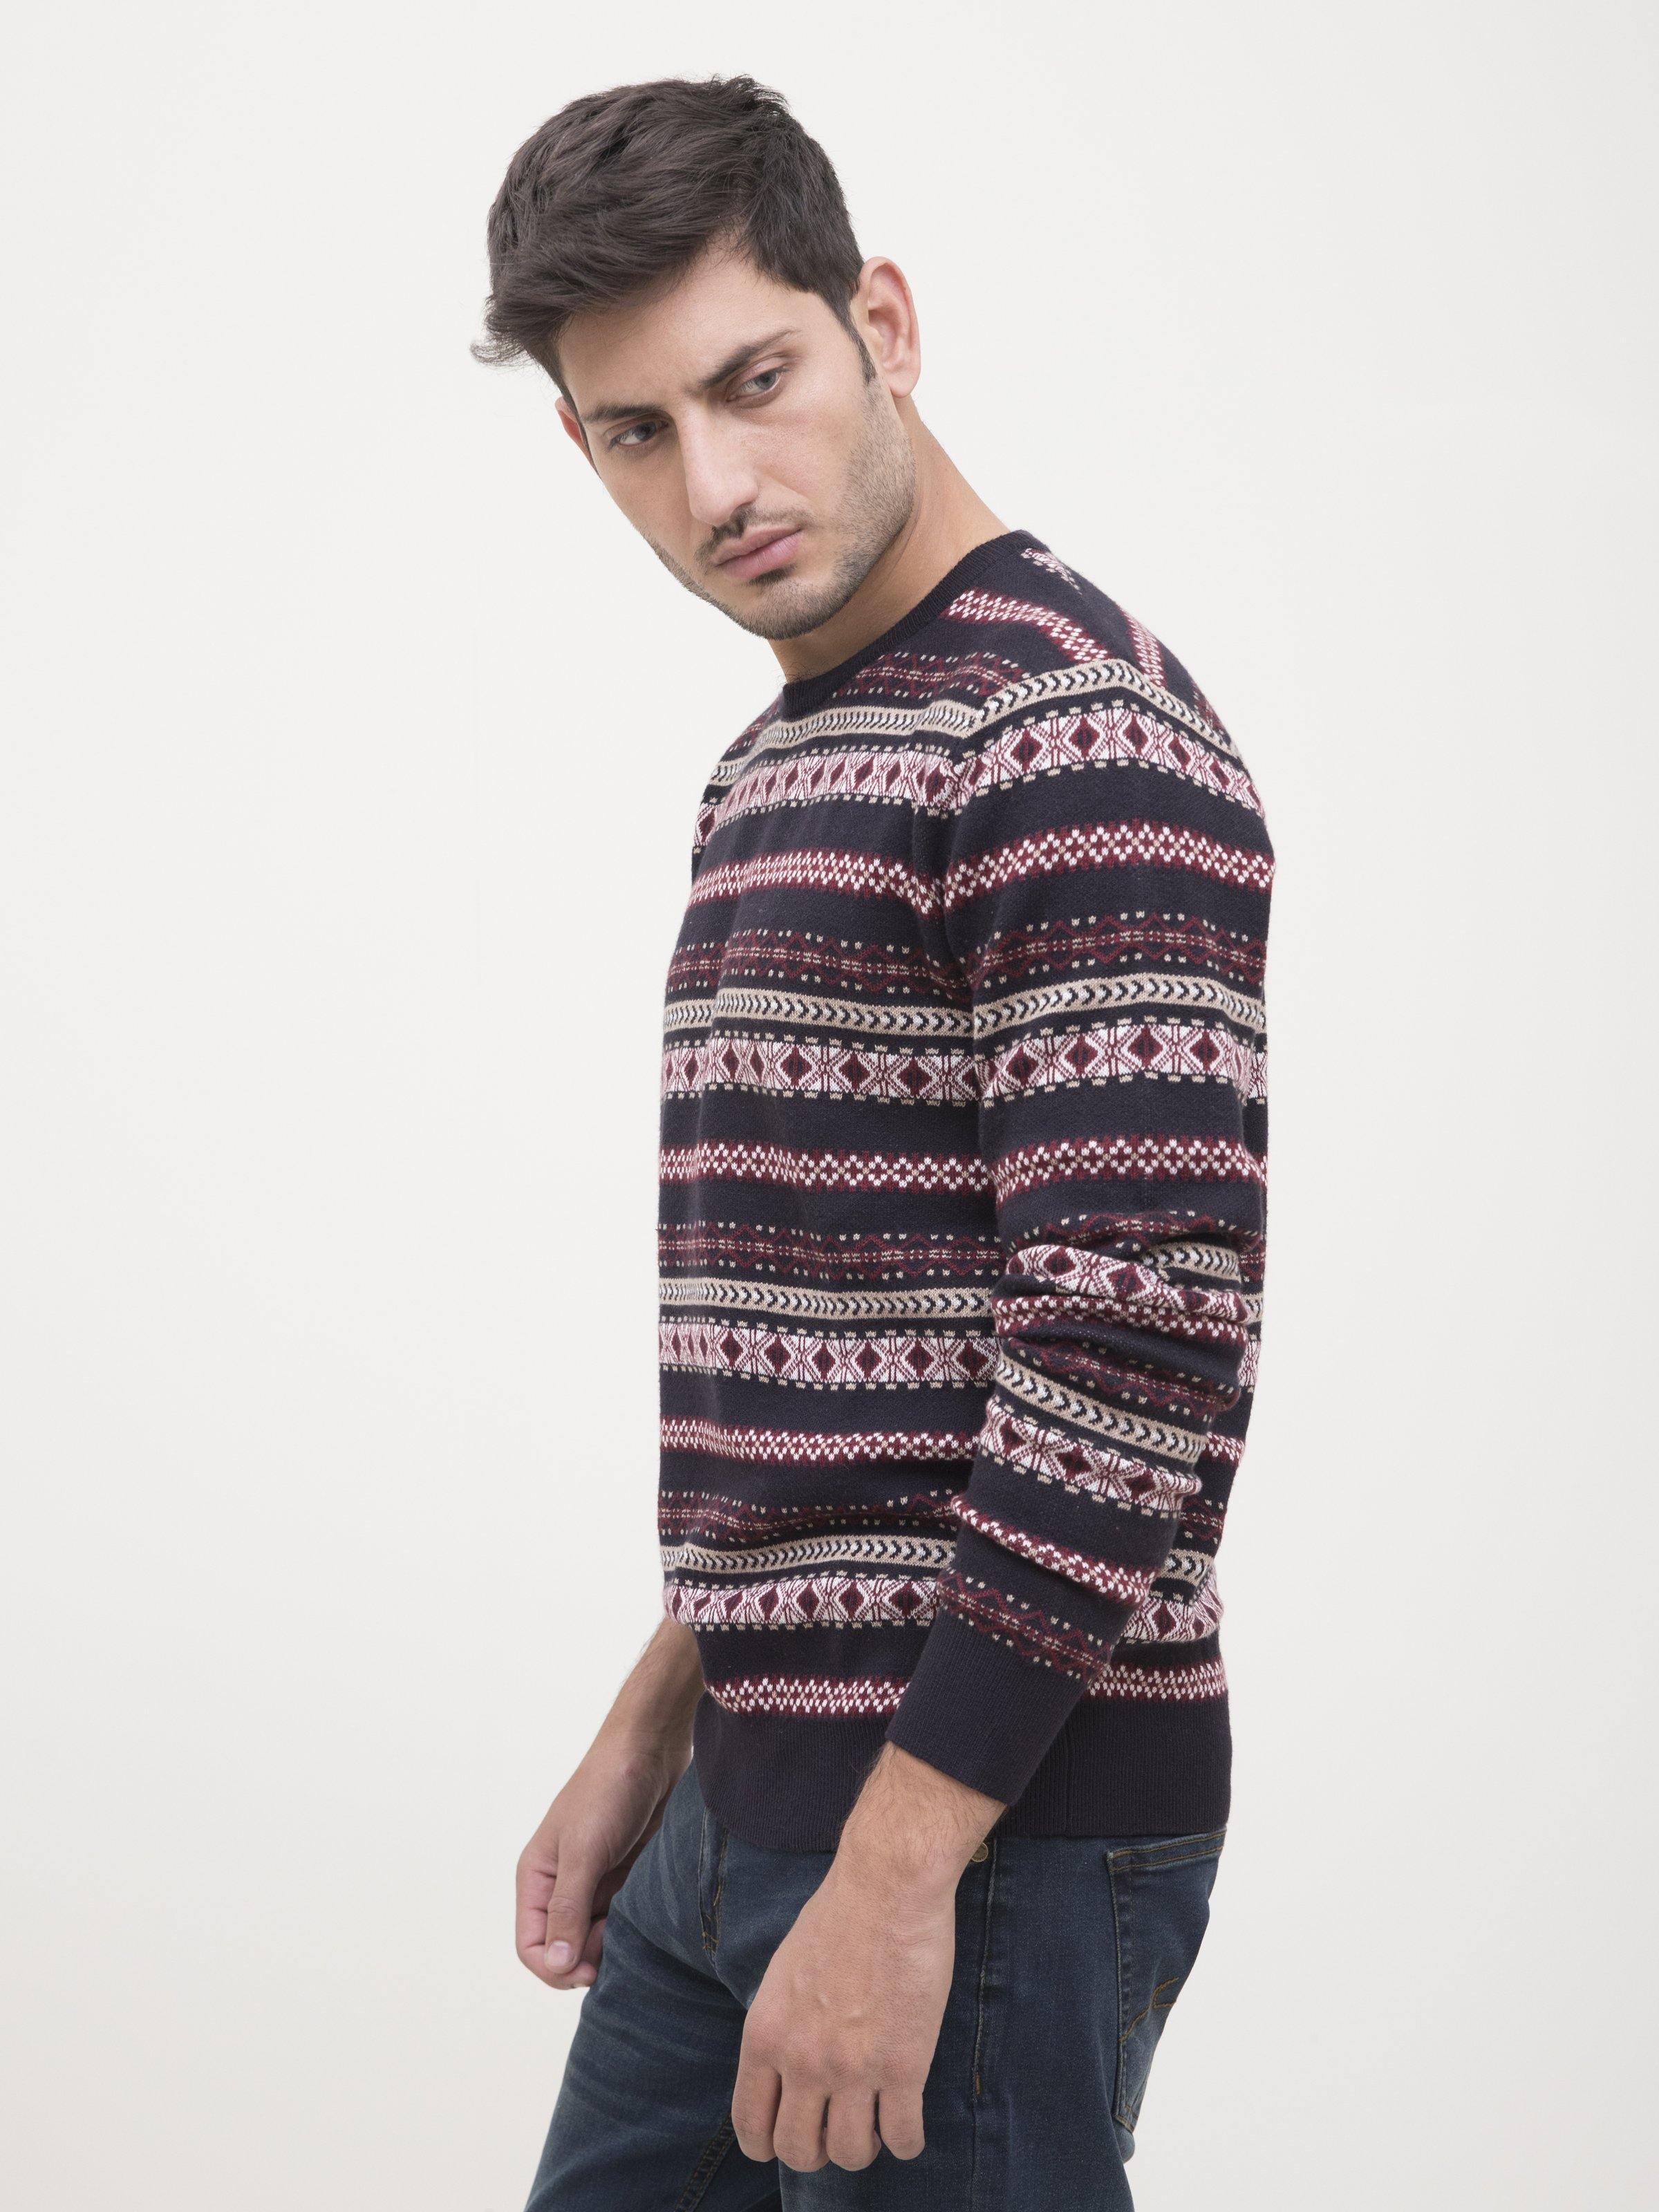 SWEATER ROUND NECK FULL SLEEVE MAHROON NAVY at Charcoal Clothing